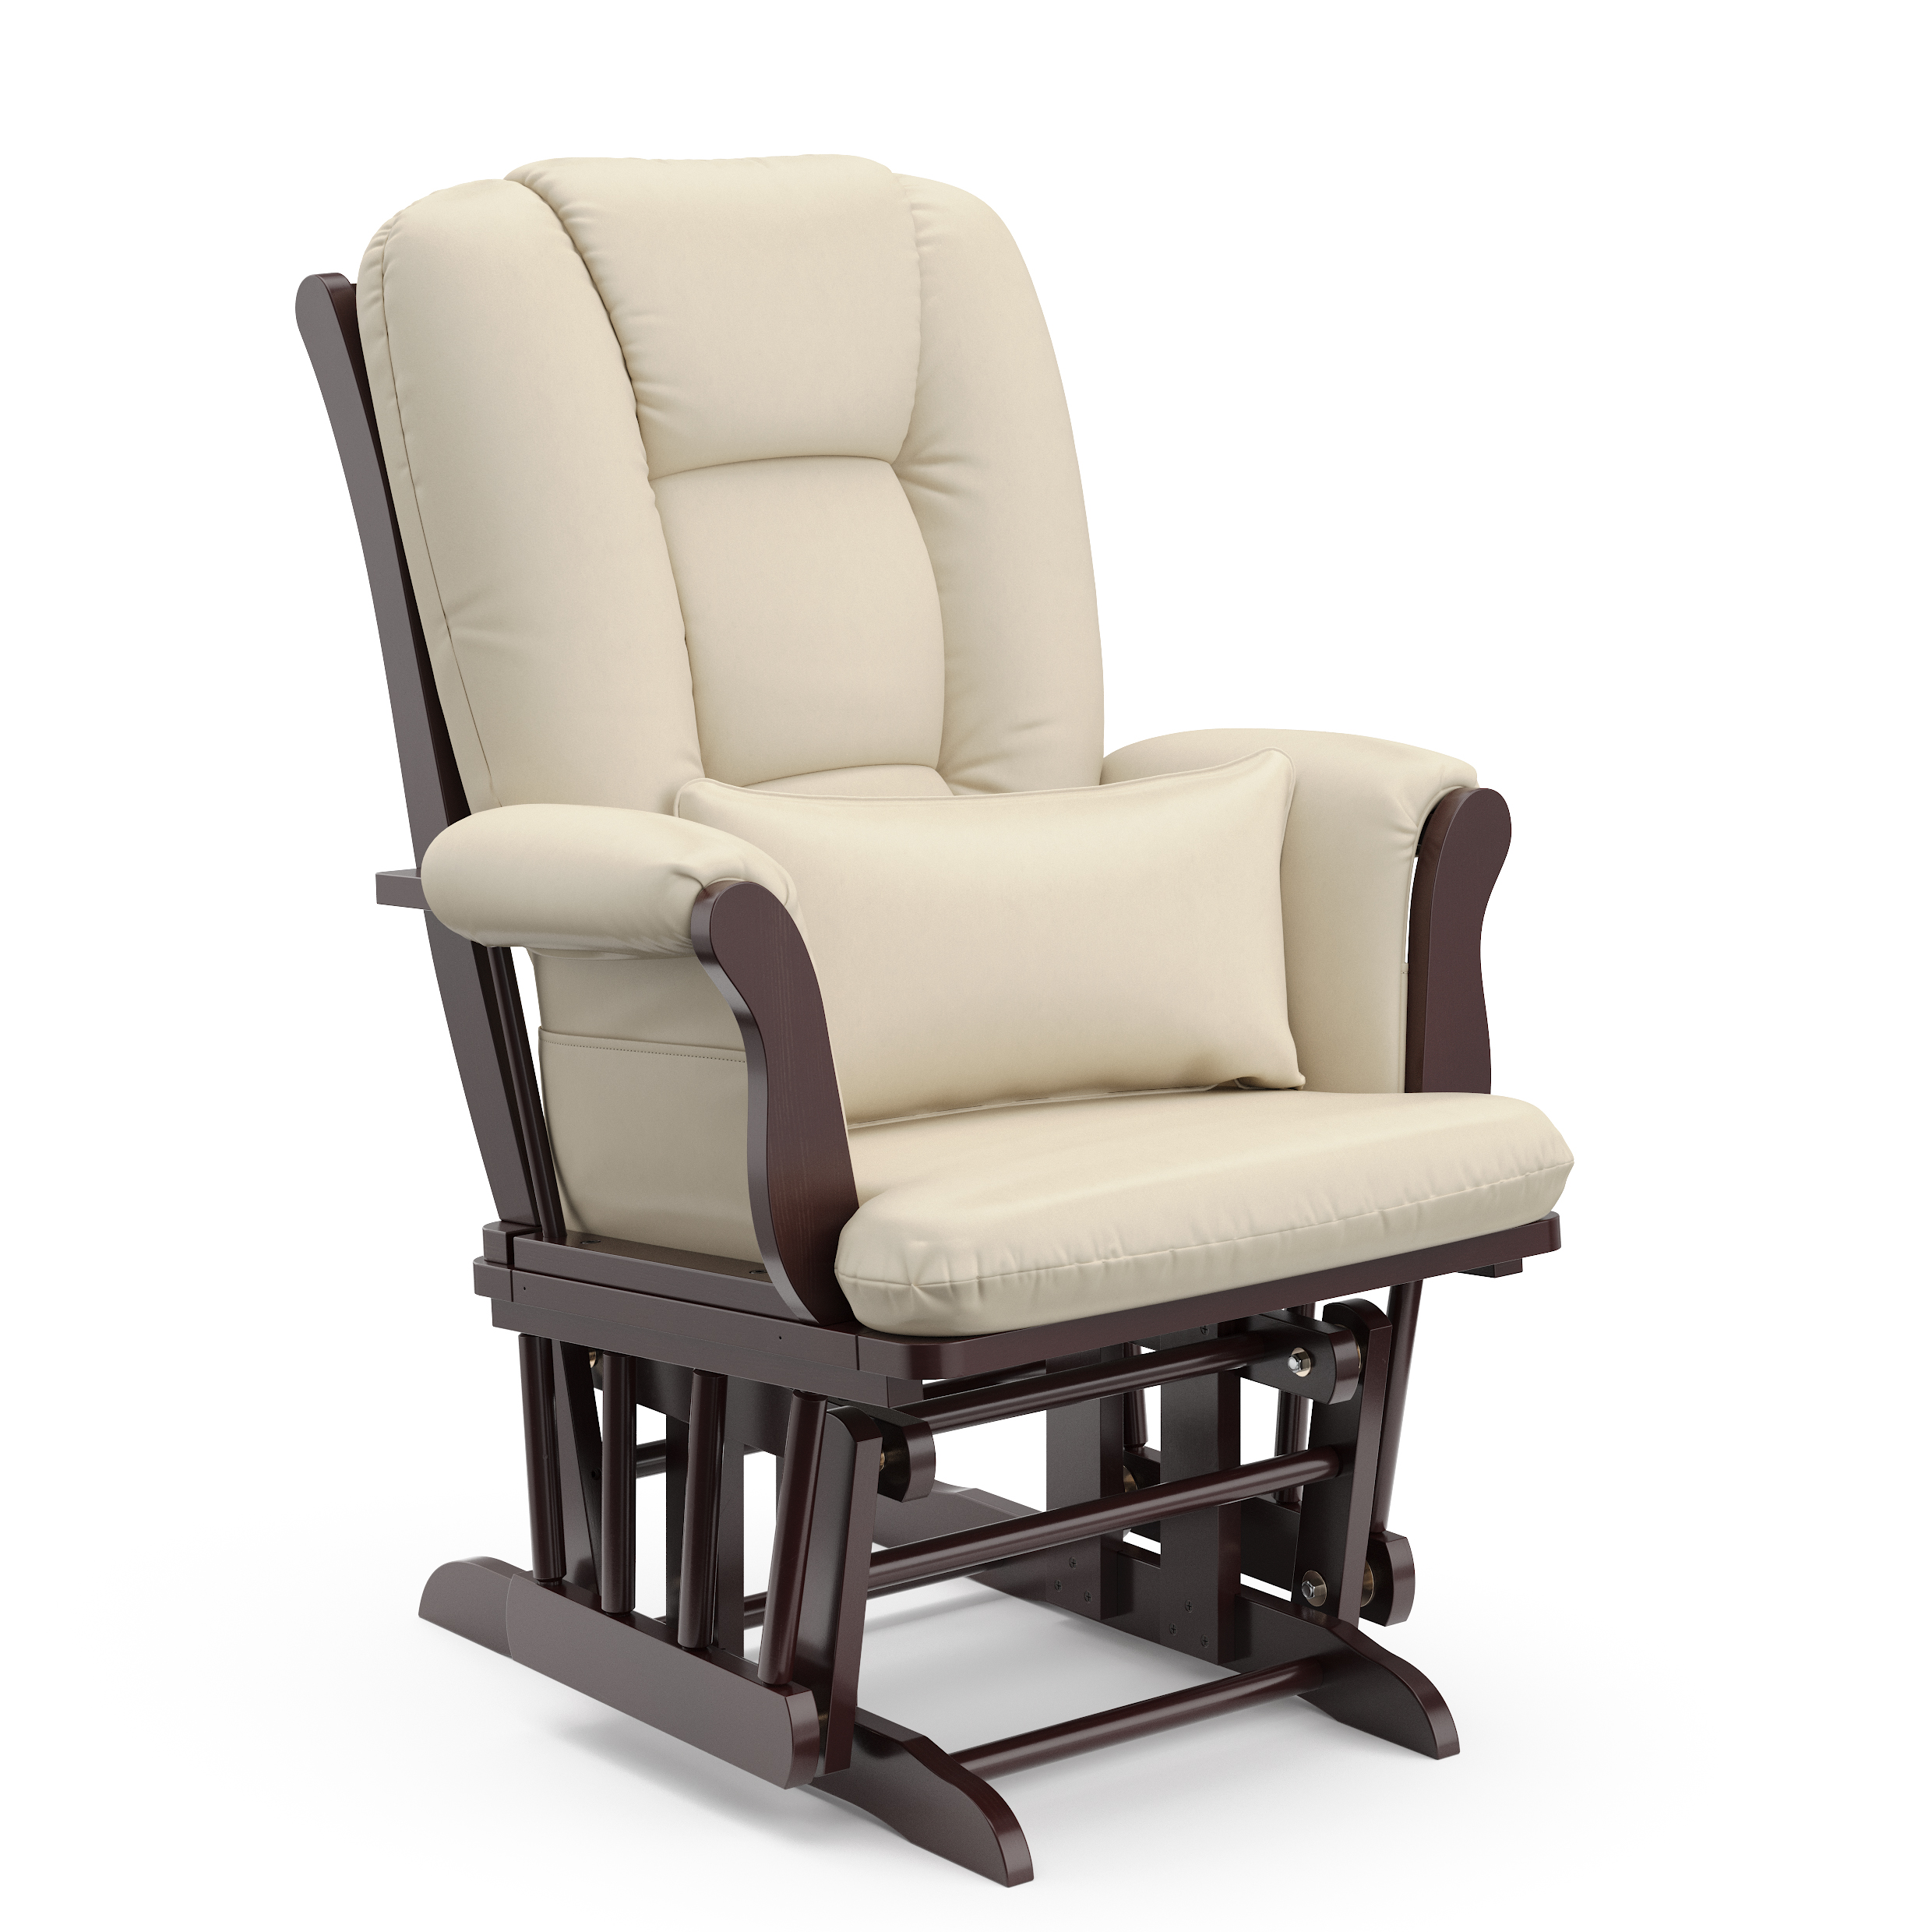 Storkcraft Tuscany Glider and Ottoman with Lower Lumbar Pillow, Espresso Finish with Beige Cushions - image 4 of 7